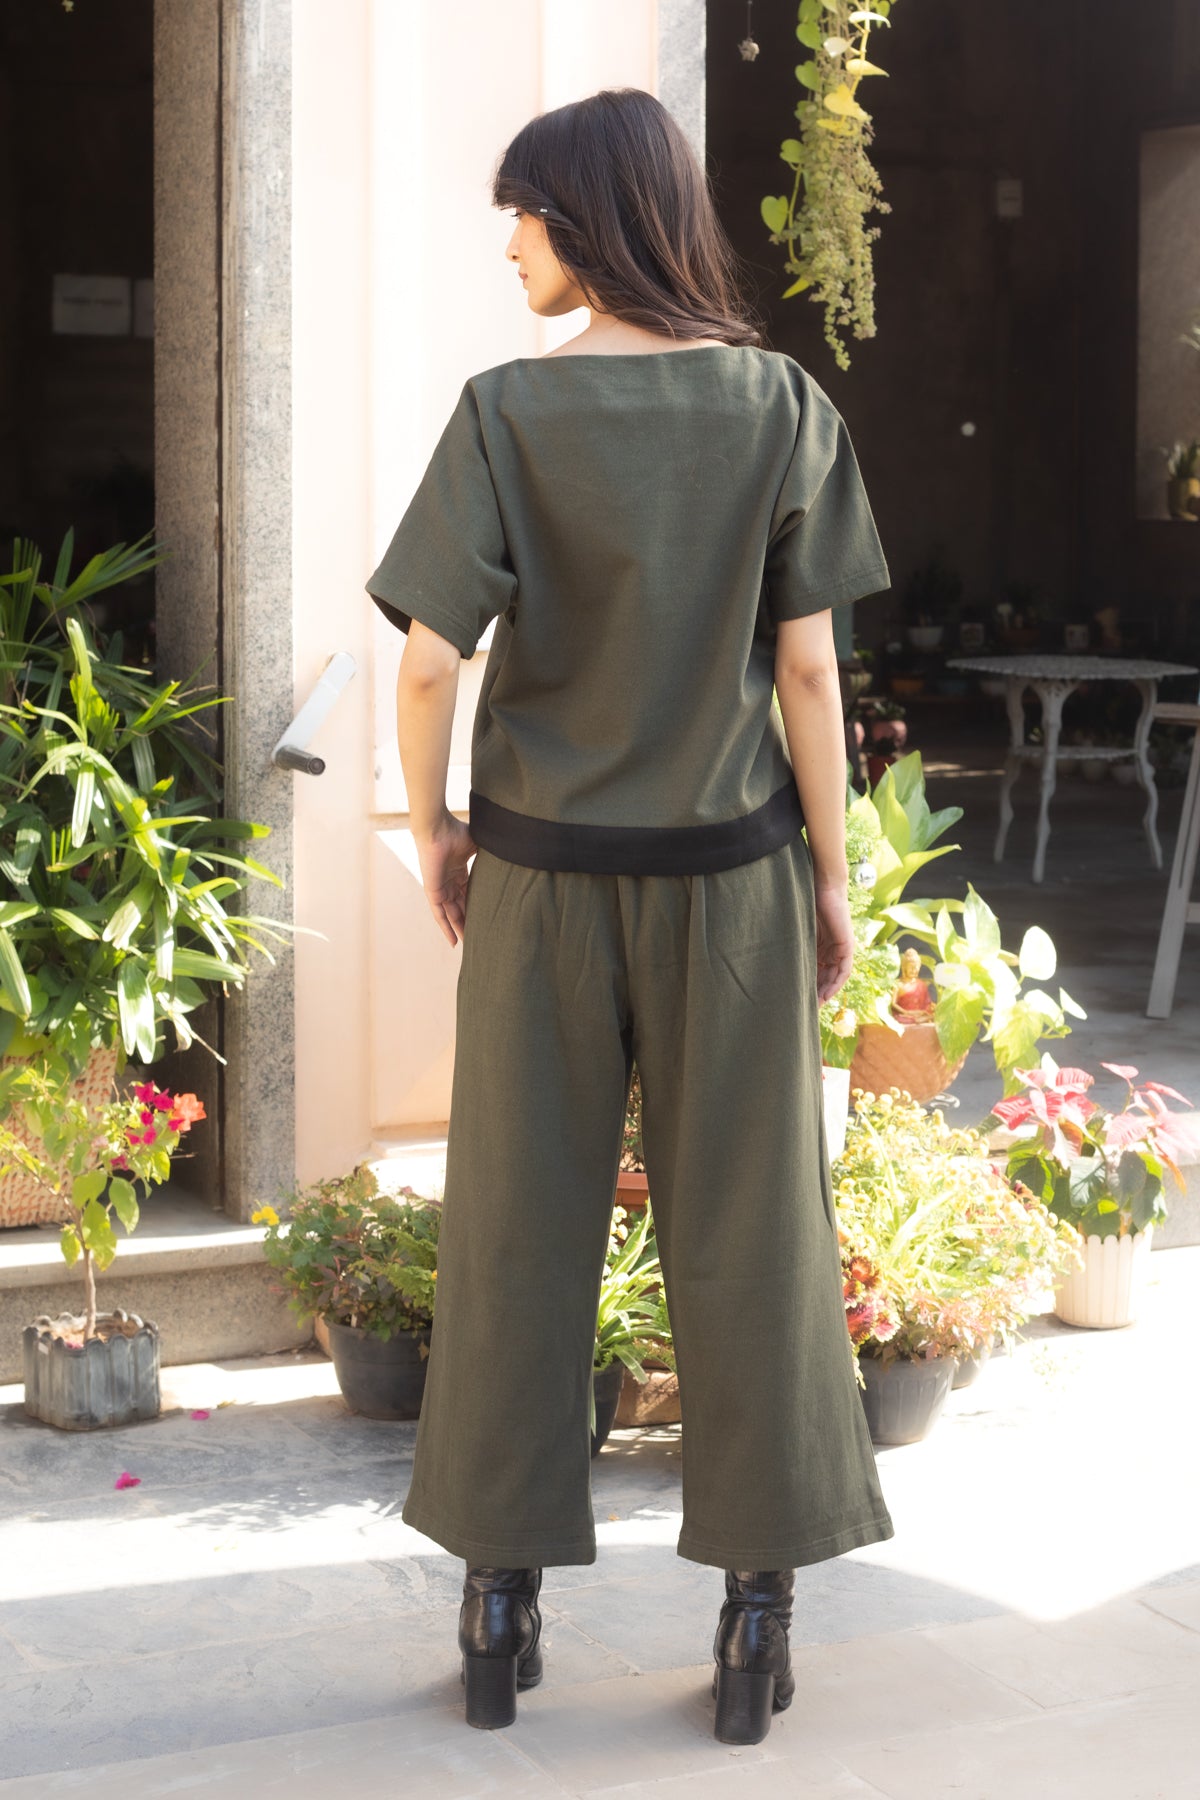 Erica Olive Green Crop Top and Flared Pants for Winter - Set